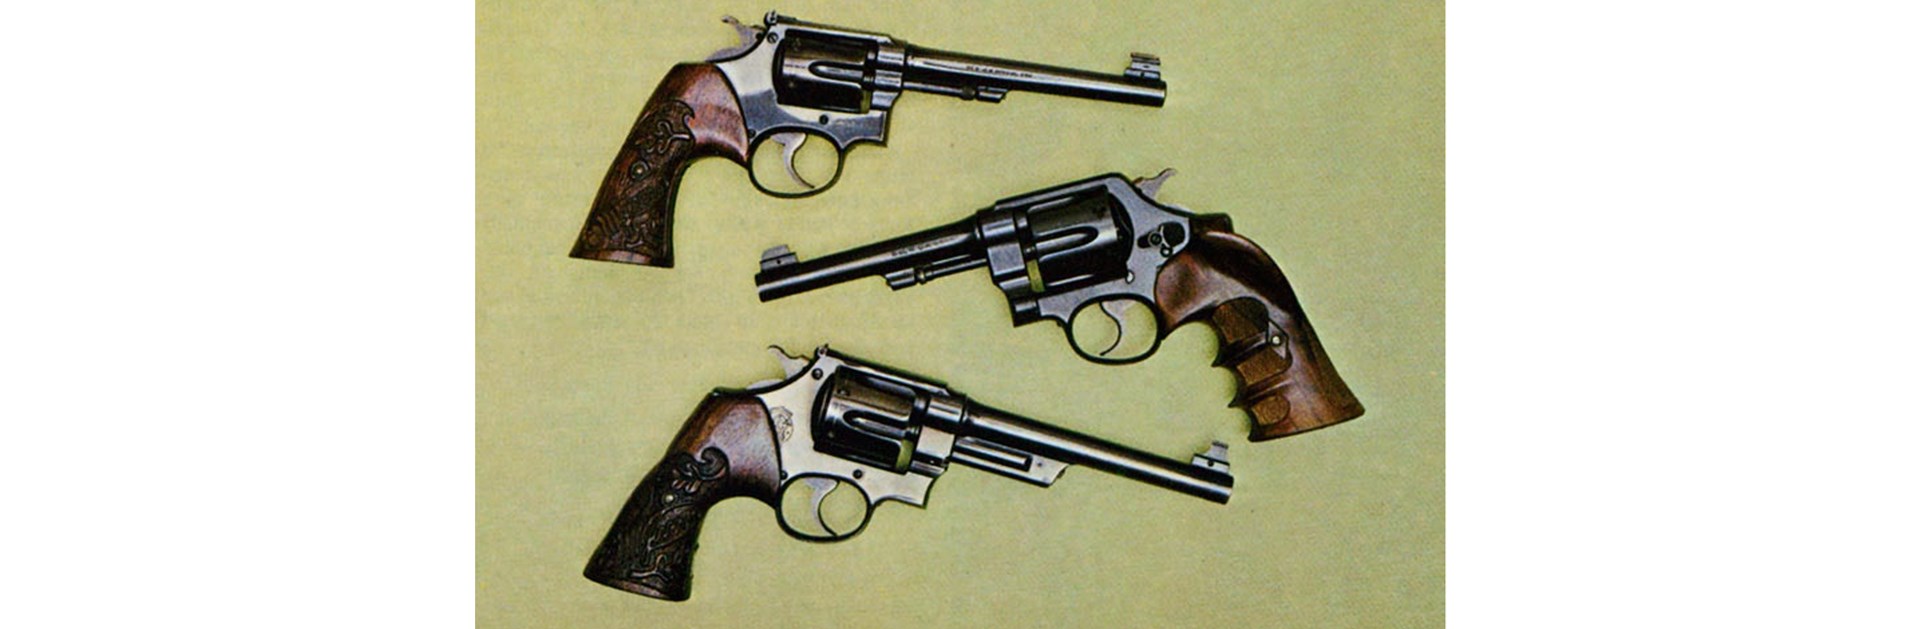 Two of these Smith & Wessons have grips carved with McGivern's name. They are (top to bottom) a K-38 with King front sight; a 1917-type .45 ACP and .44 Triple Lock.